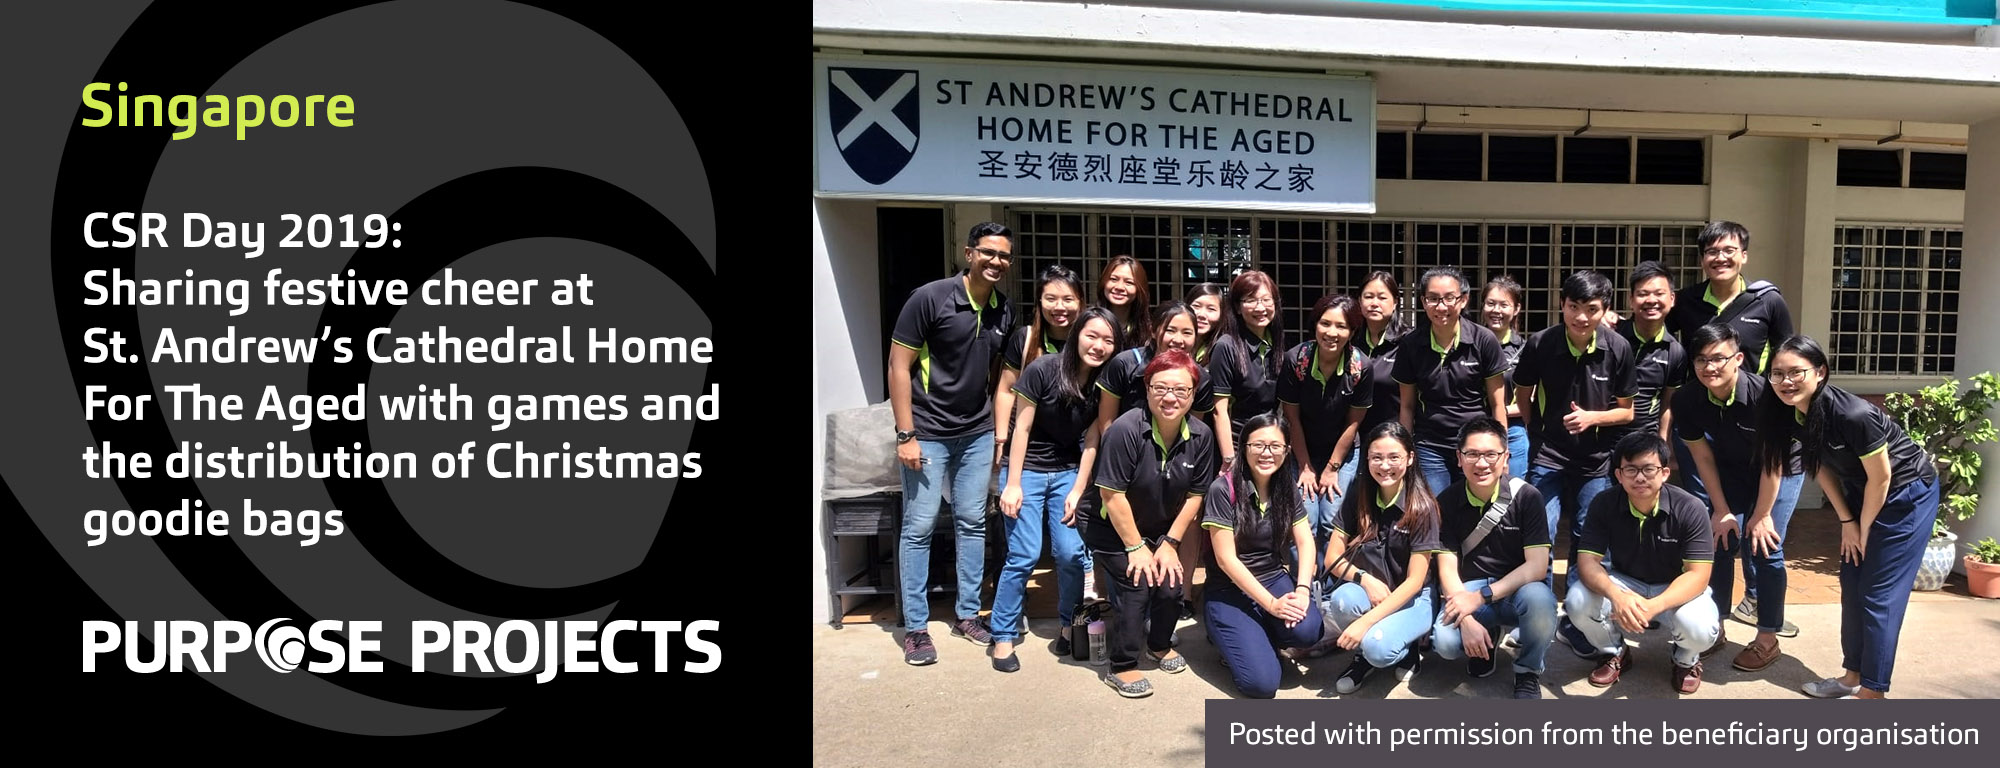 Baker Tilly Singapore CSR Day 2019_Purpose Projects_St Andrew's Cathedral Home For The Aged_Purpose Projects